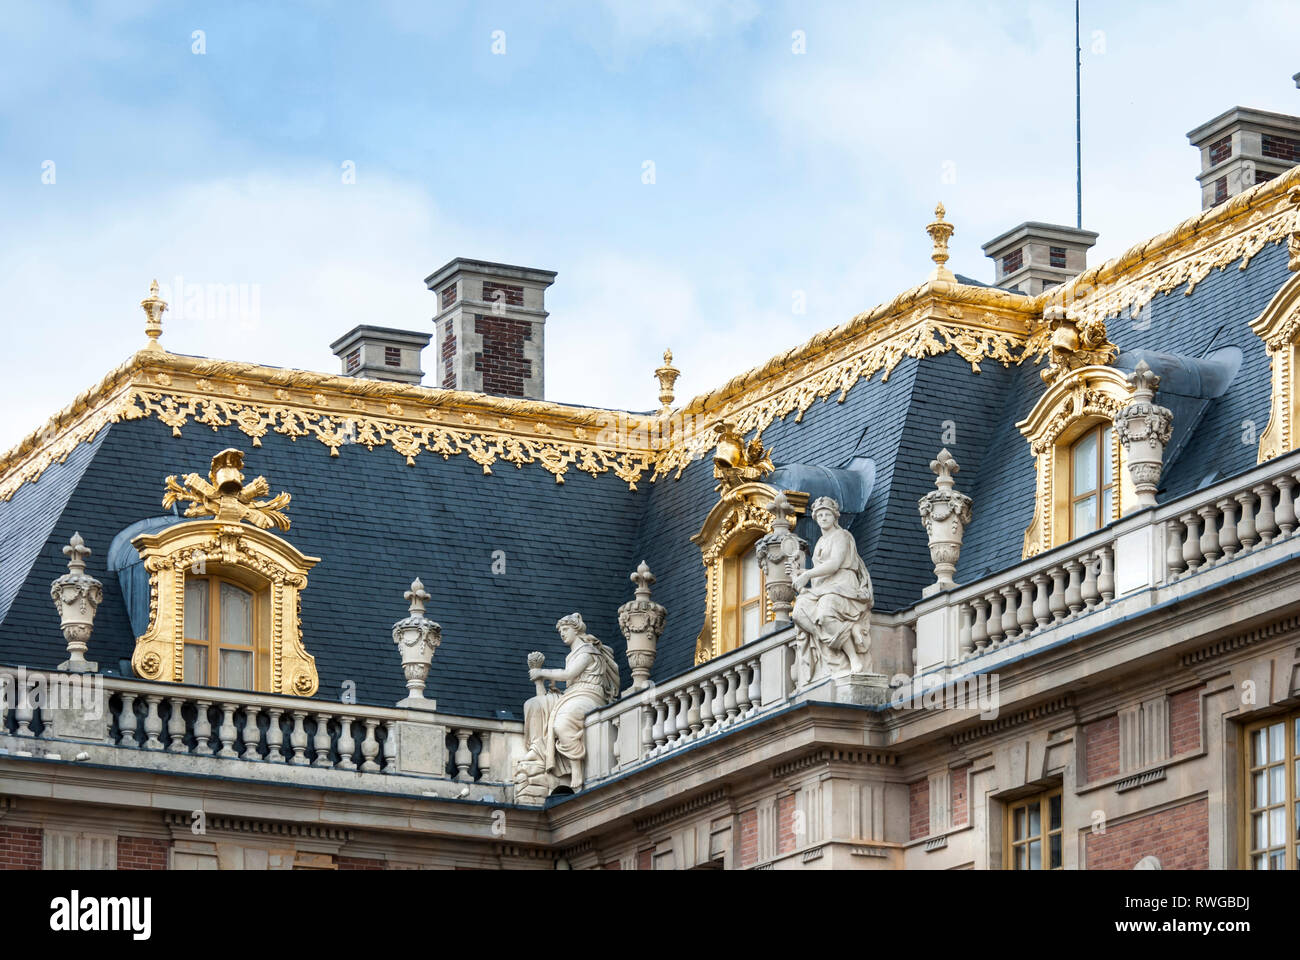 Gilded roof decoration of Versailles Palace Stock Photo